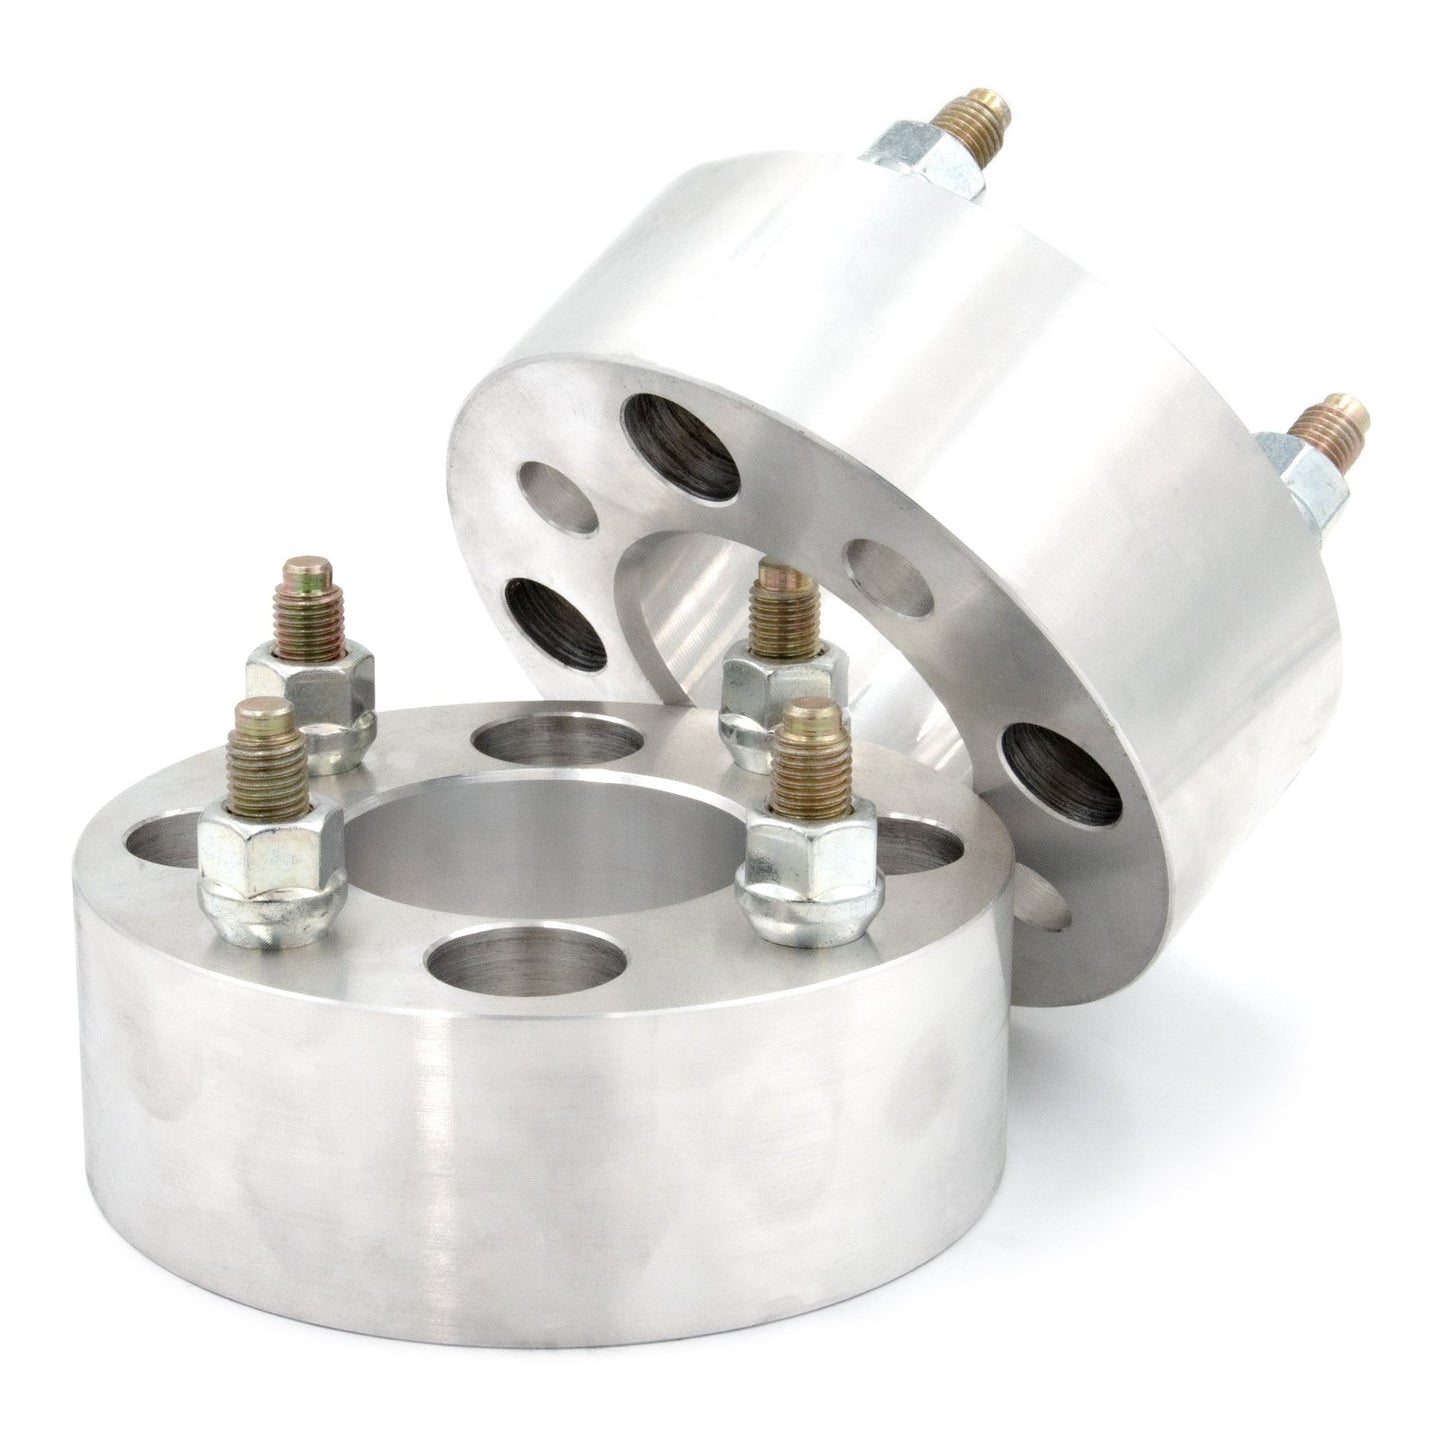 4x4" to 4x110 Wheel Spacer/Adapter - Thickness: 3/4"- 4"